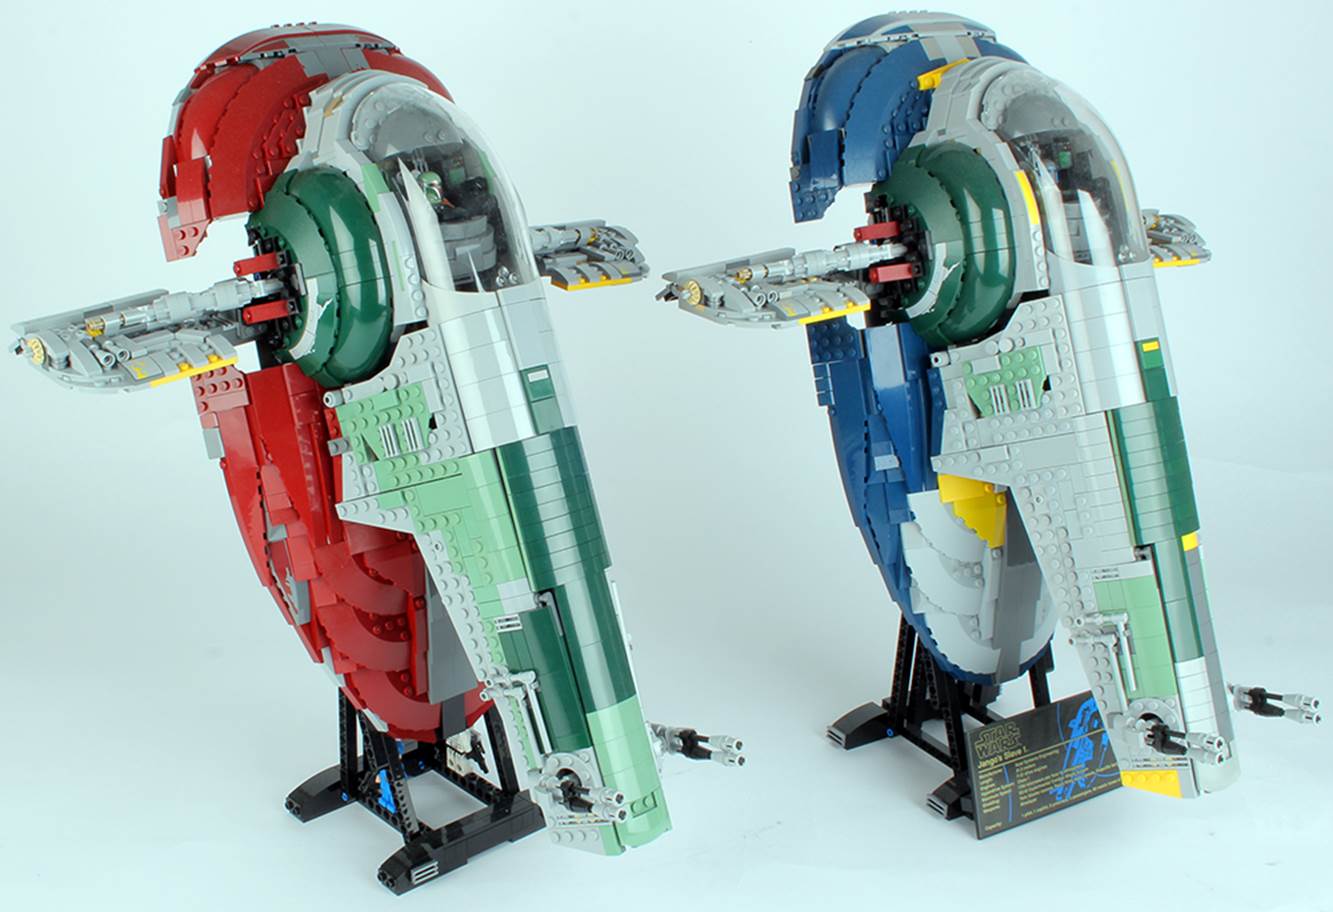 Have Any Ucs Slave 1 Owners Modified There Slave 1 And How